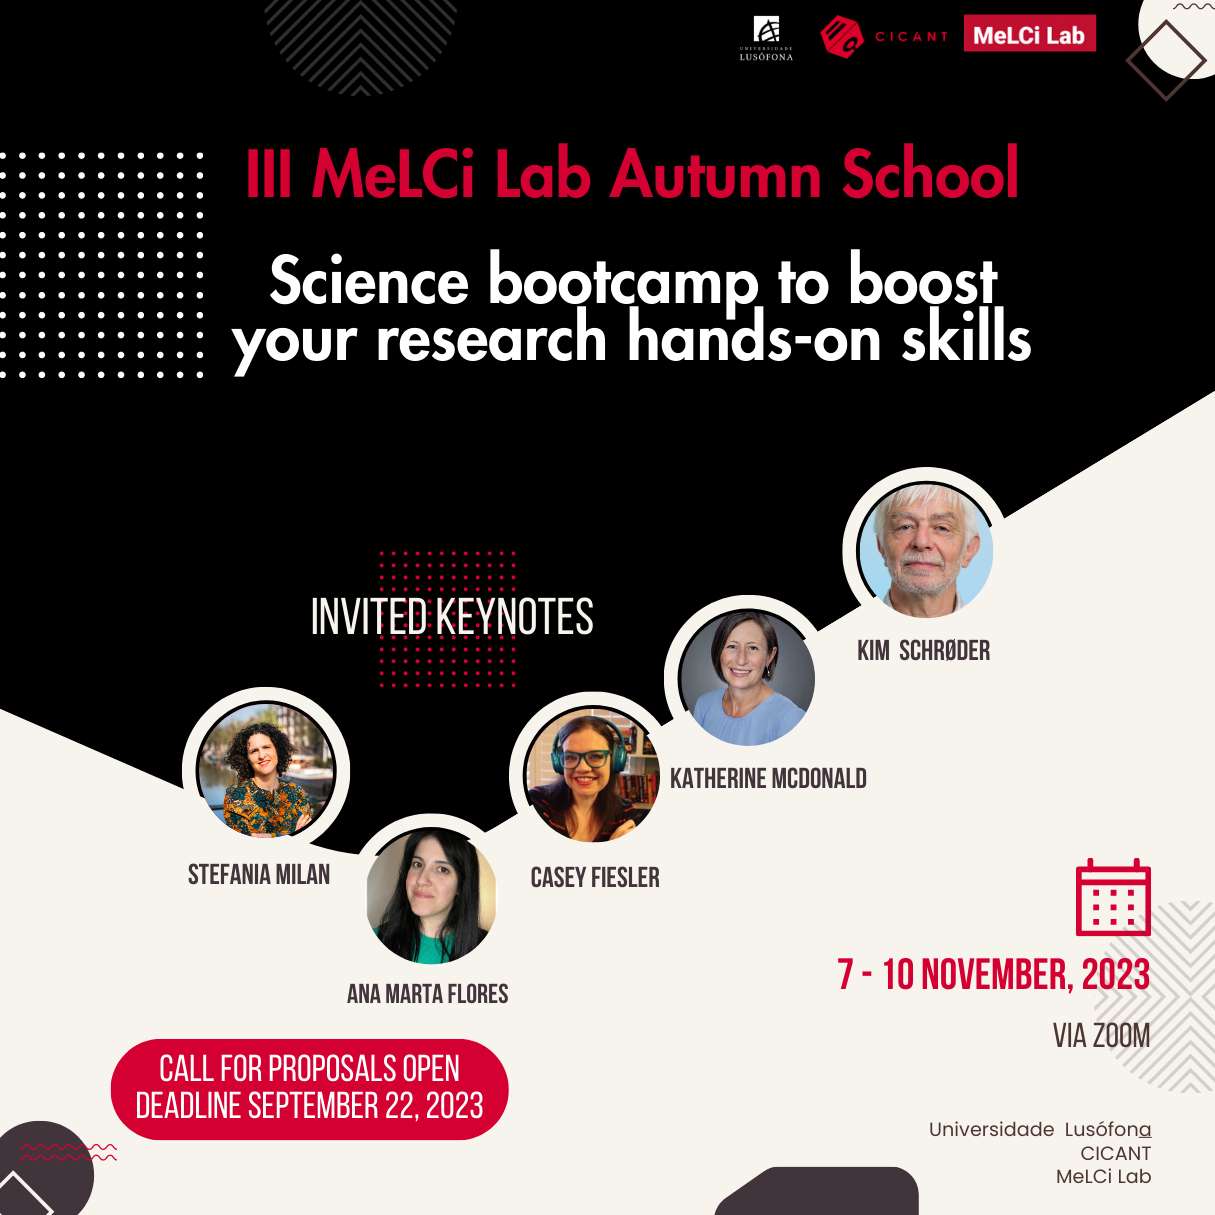 III MeLCi Lab Autumn School – Science Bootcamp to Boost Your Research Hands-On Skills